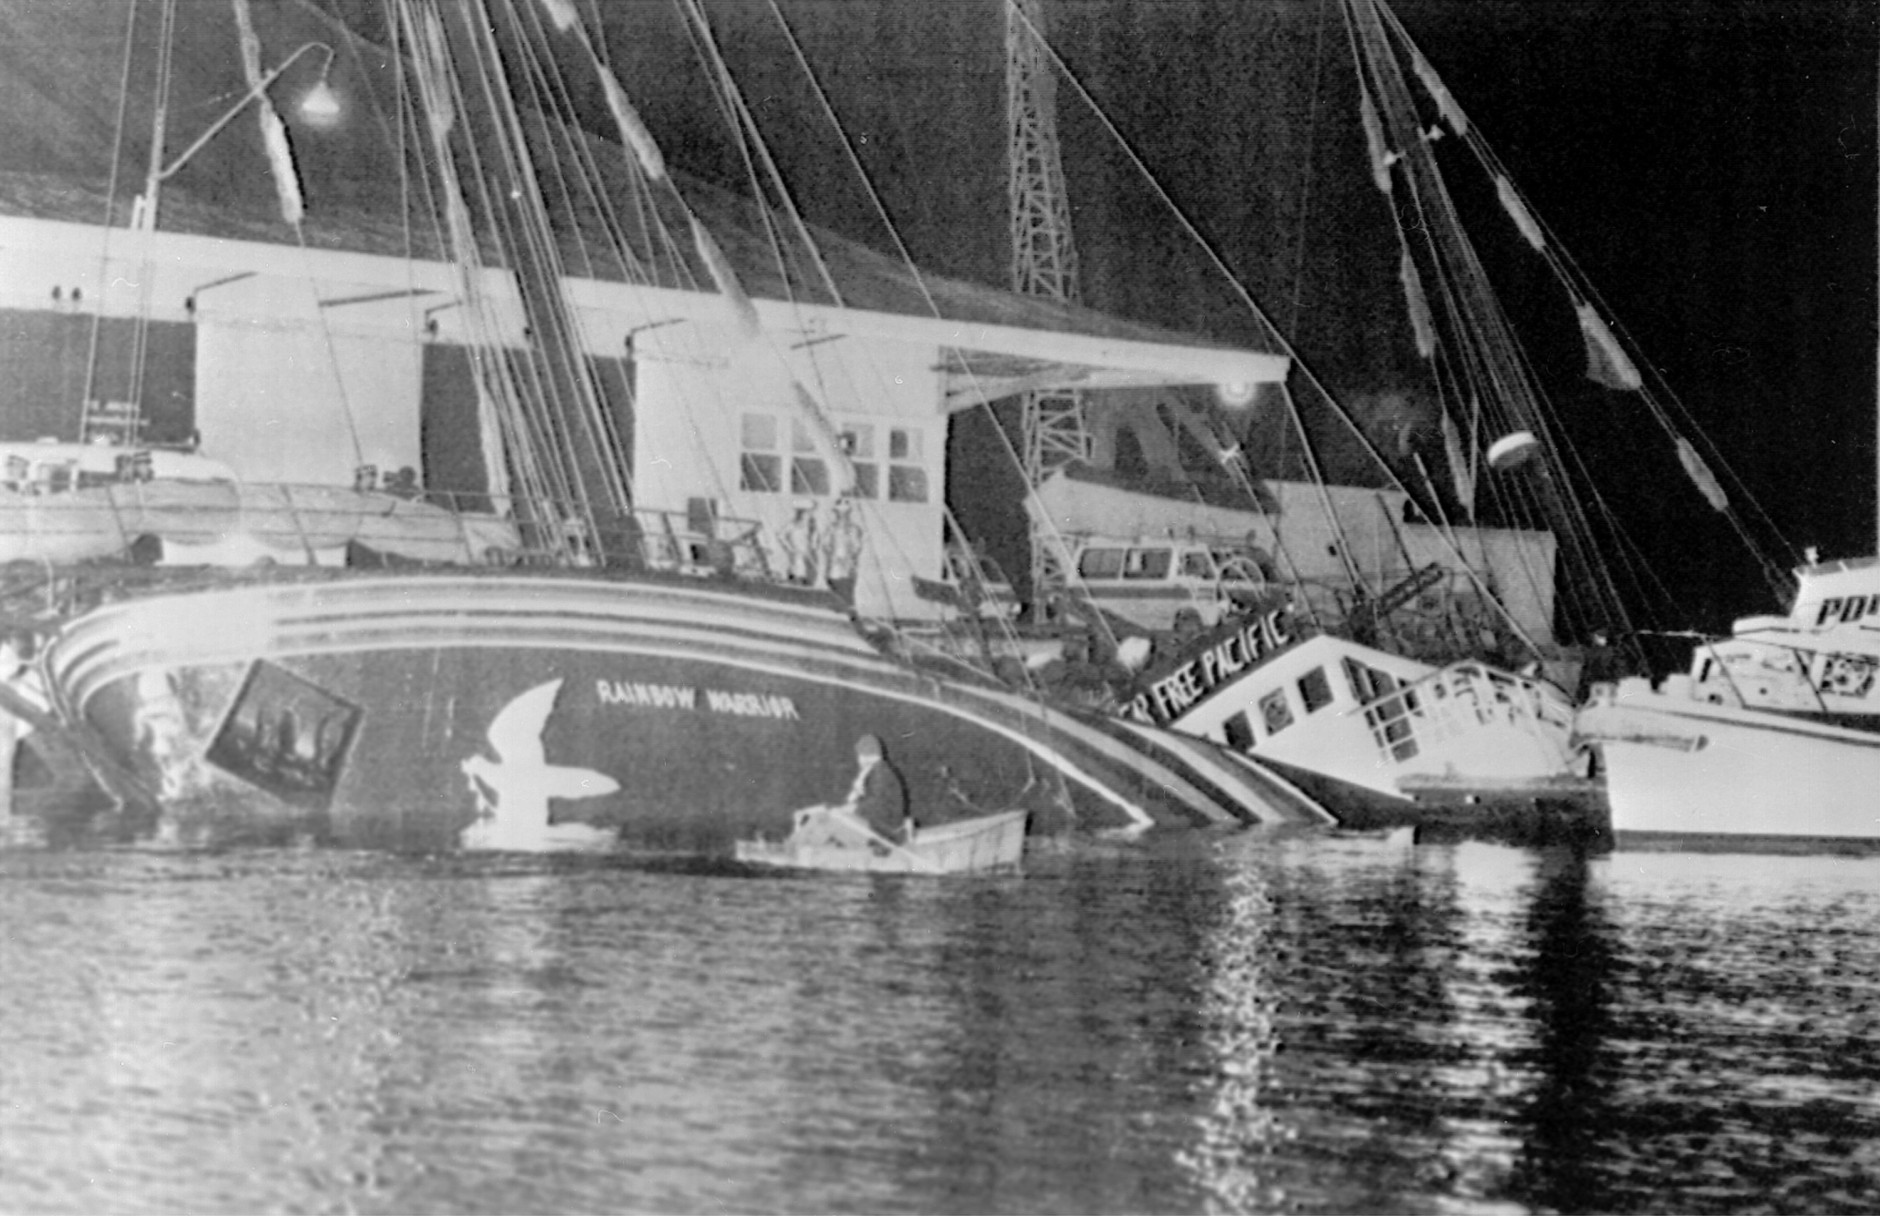 FILE - In this July 10, 1985 file photo, the Greenpeace ship Rainbow Warrior is seen after it was sank in Auckland harbor, after explosions on board.  A retired French secret service agent who says he planted the bombs 30 years ago which sank a Greenpeace ship and killed a photographer has apologized.  Jean-Luc Kister told Television New Zealand Sunday, Sept. 6, 2015, that he and his colleagues never meant to kill anybody when they attached two bombs to the Rainbow Warrior on July 10, 1985, while the boat was moored in Auckland. (NZ Herald via AP, File) NEW ZEALAND OUT